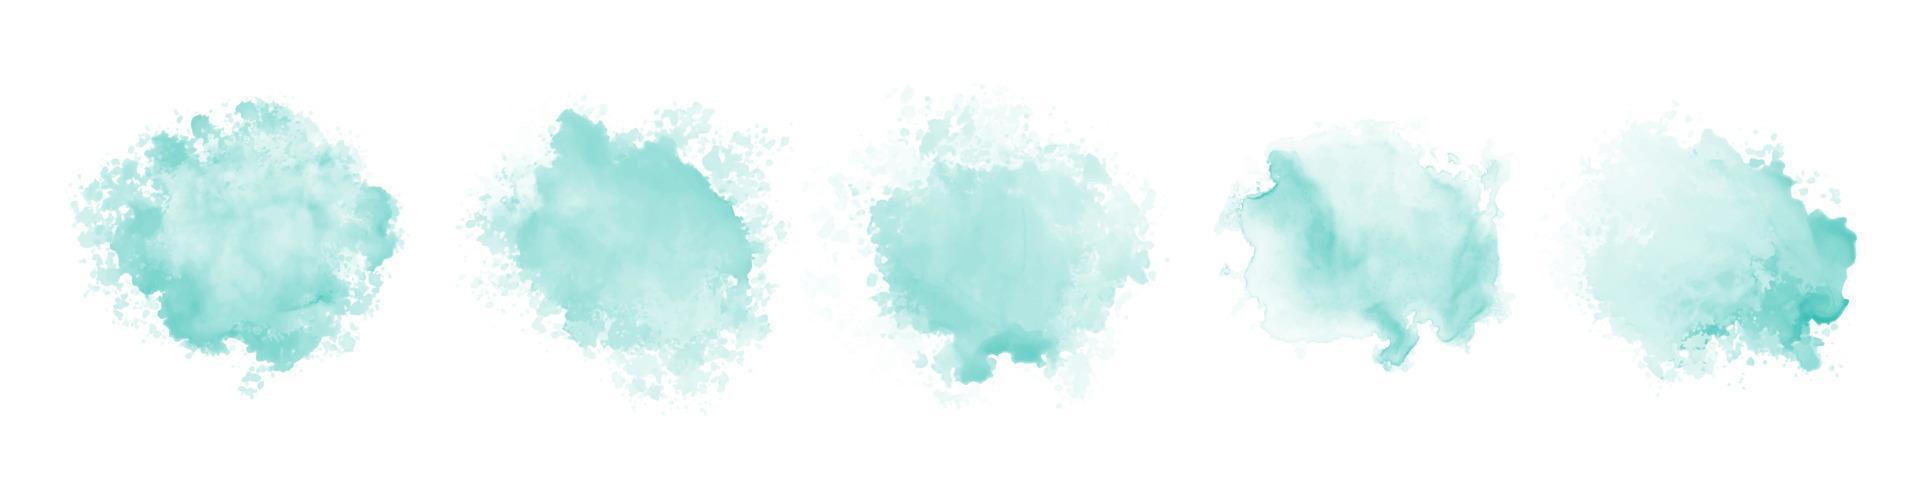 Set of abstract mint green watercolor water splash on a white background. Vector watercolour texture in mint color